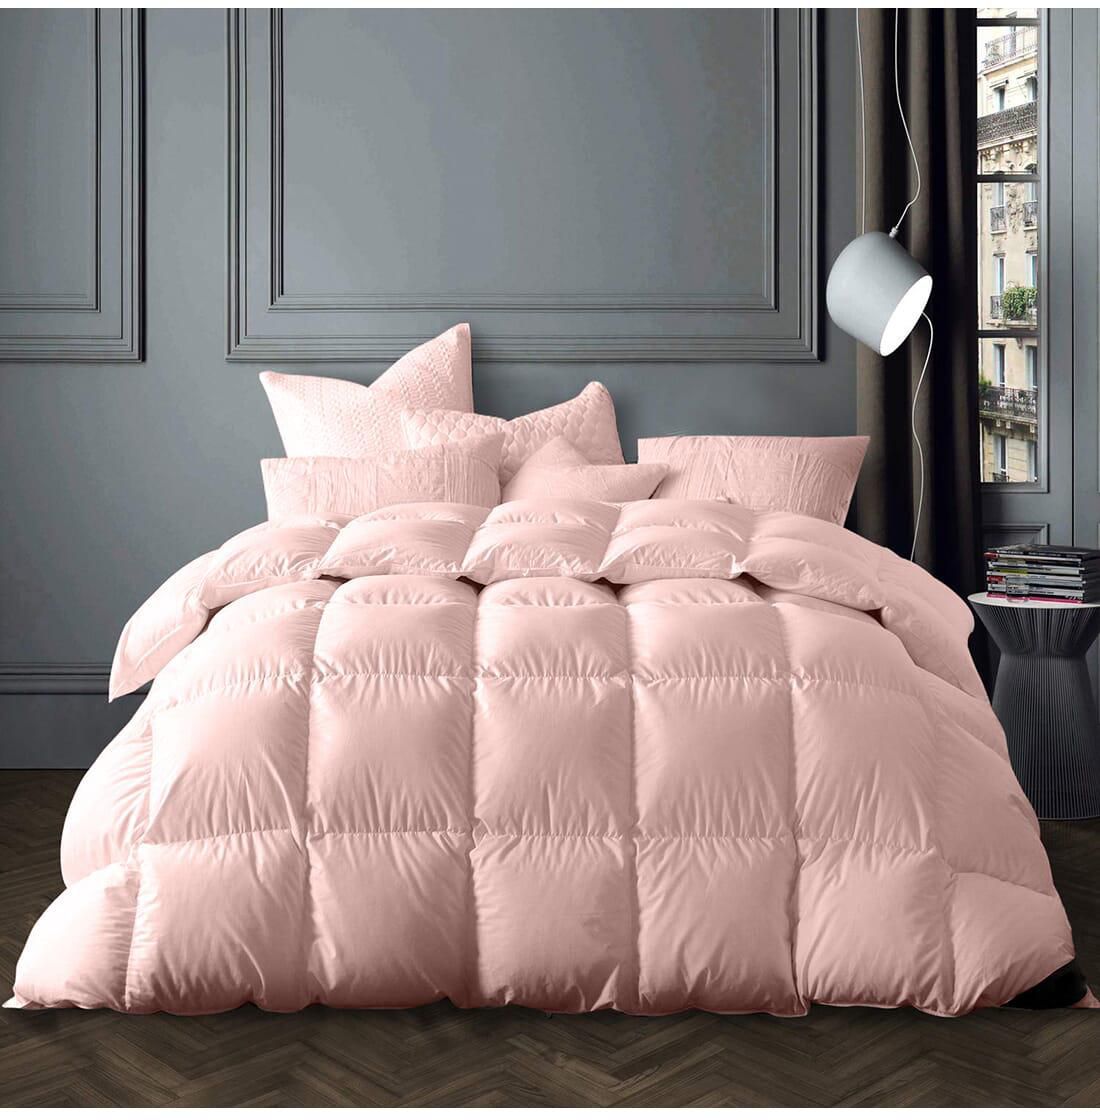 Regal In House 2-Pieces 100% Turkish Cotton Comforter Queen Size - Pink 50001 v52